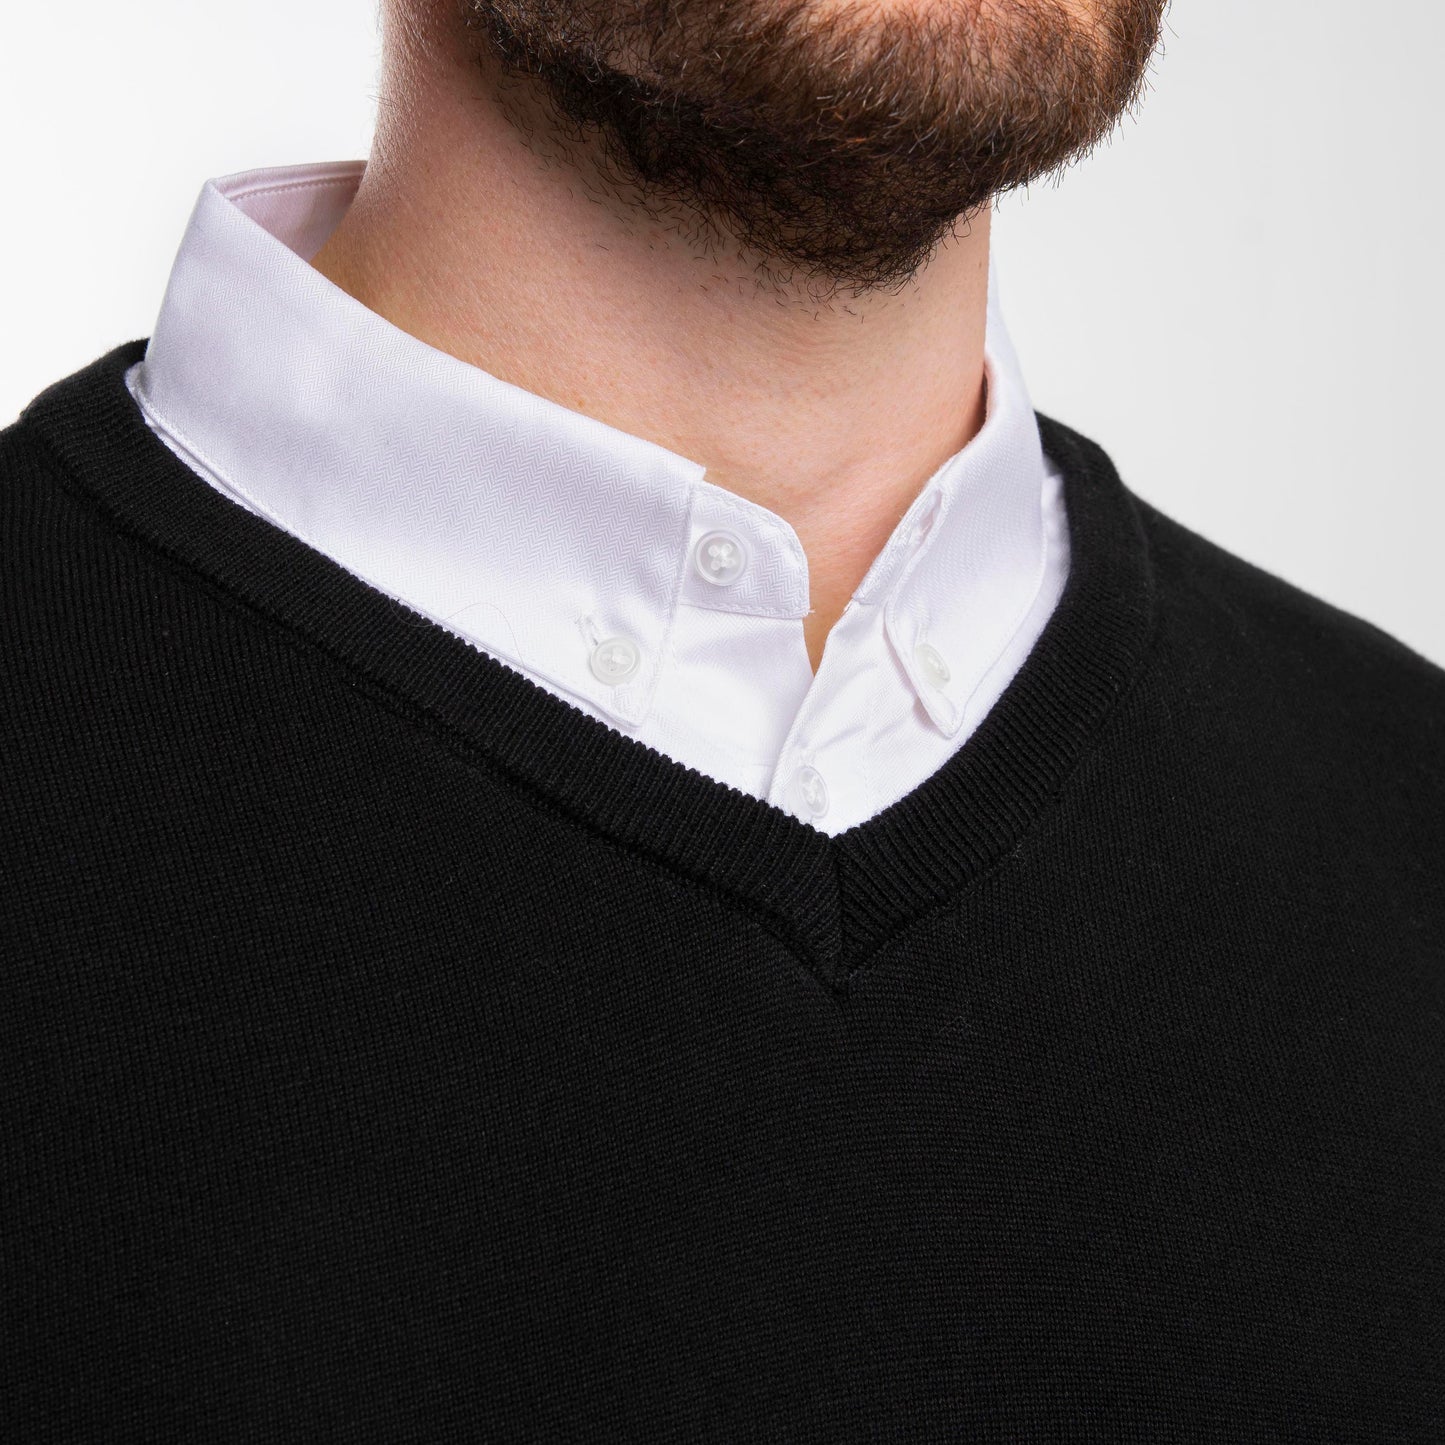 Classic Black Sweater with White Collar